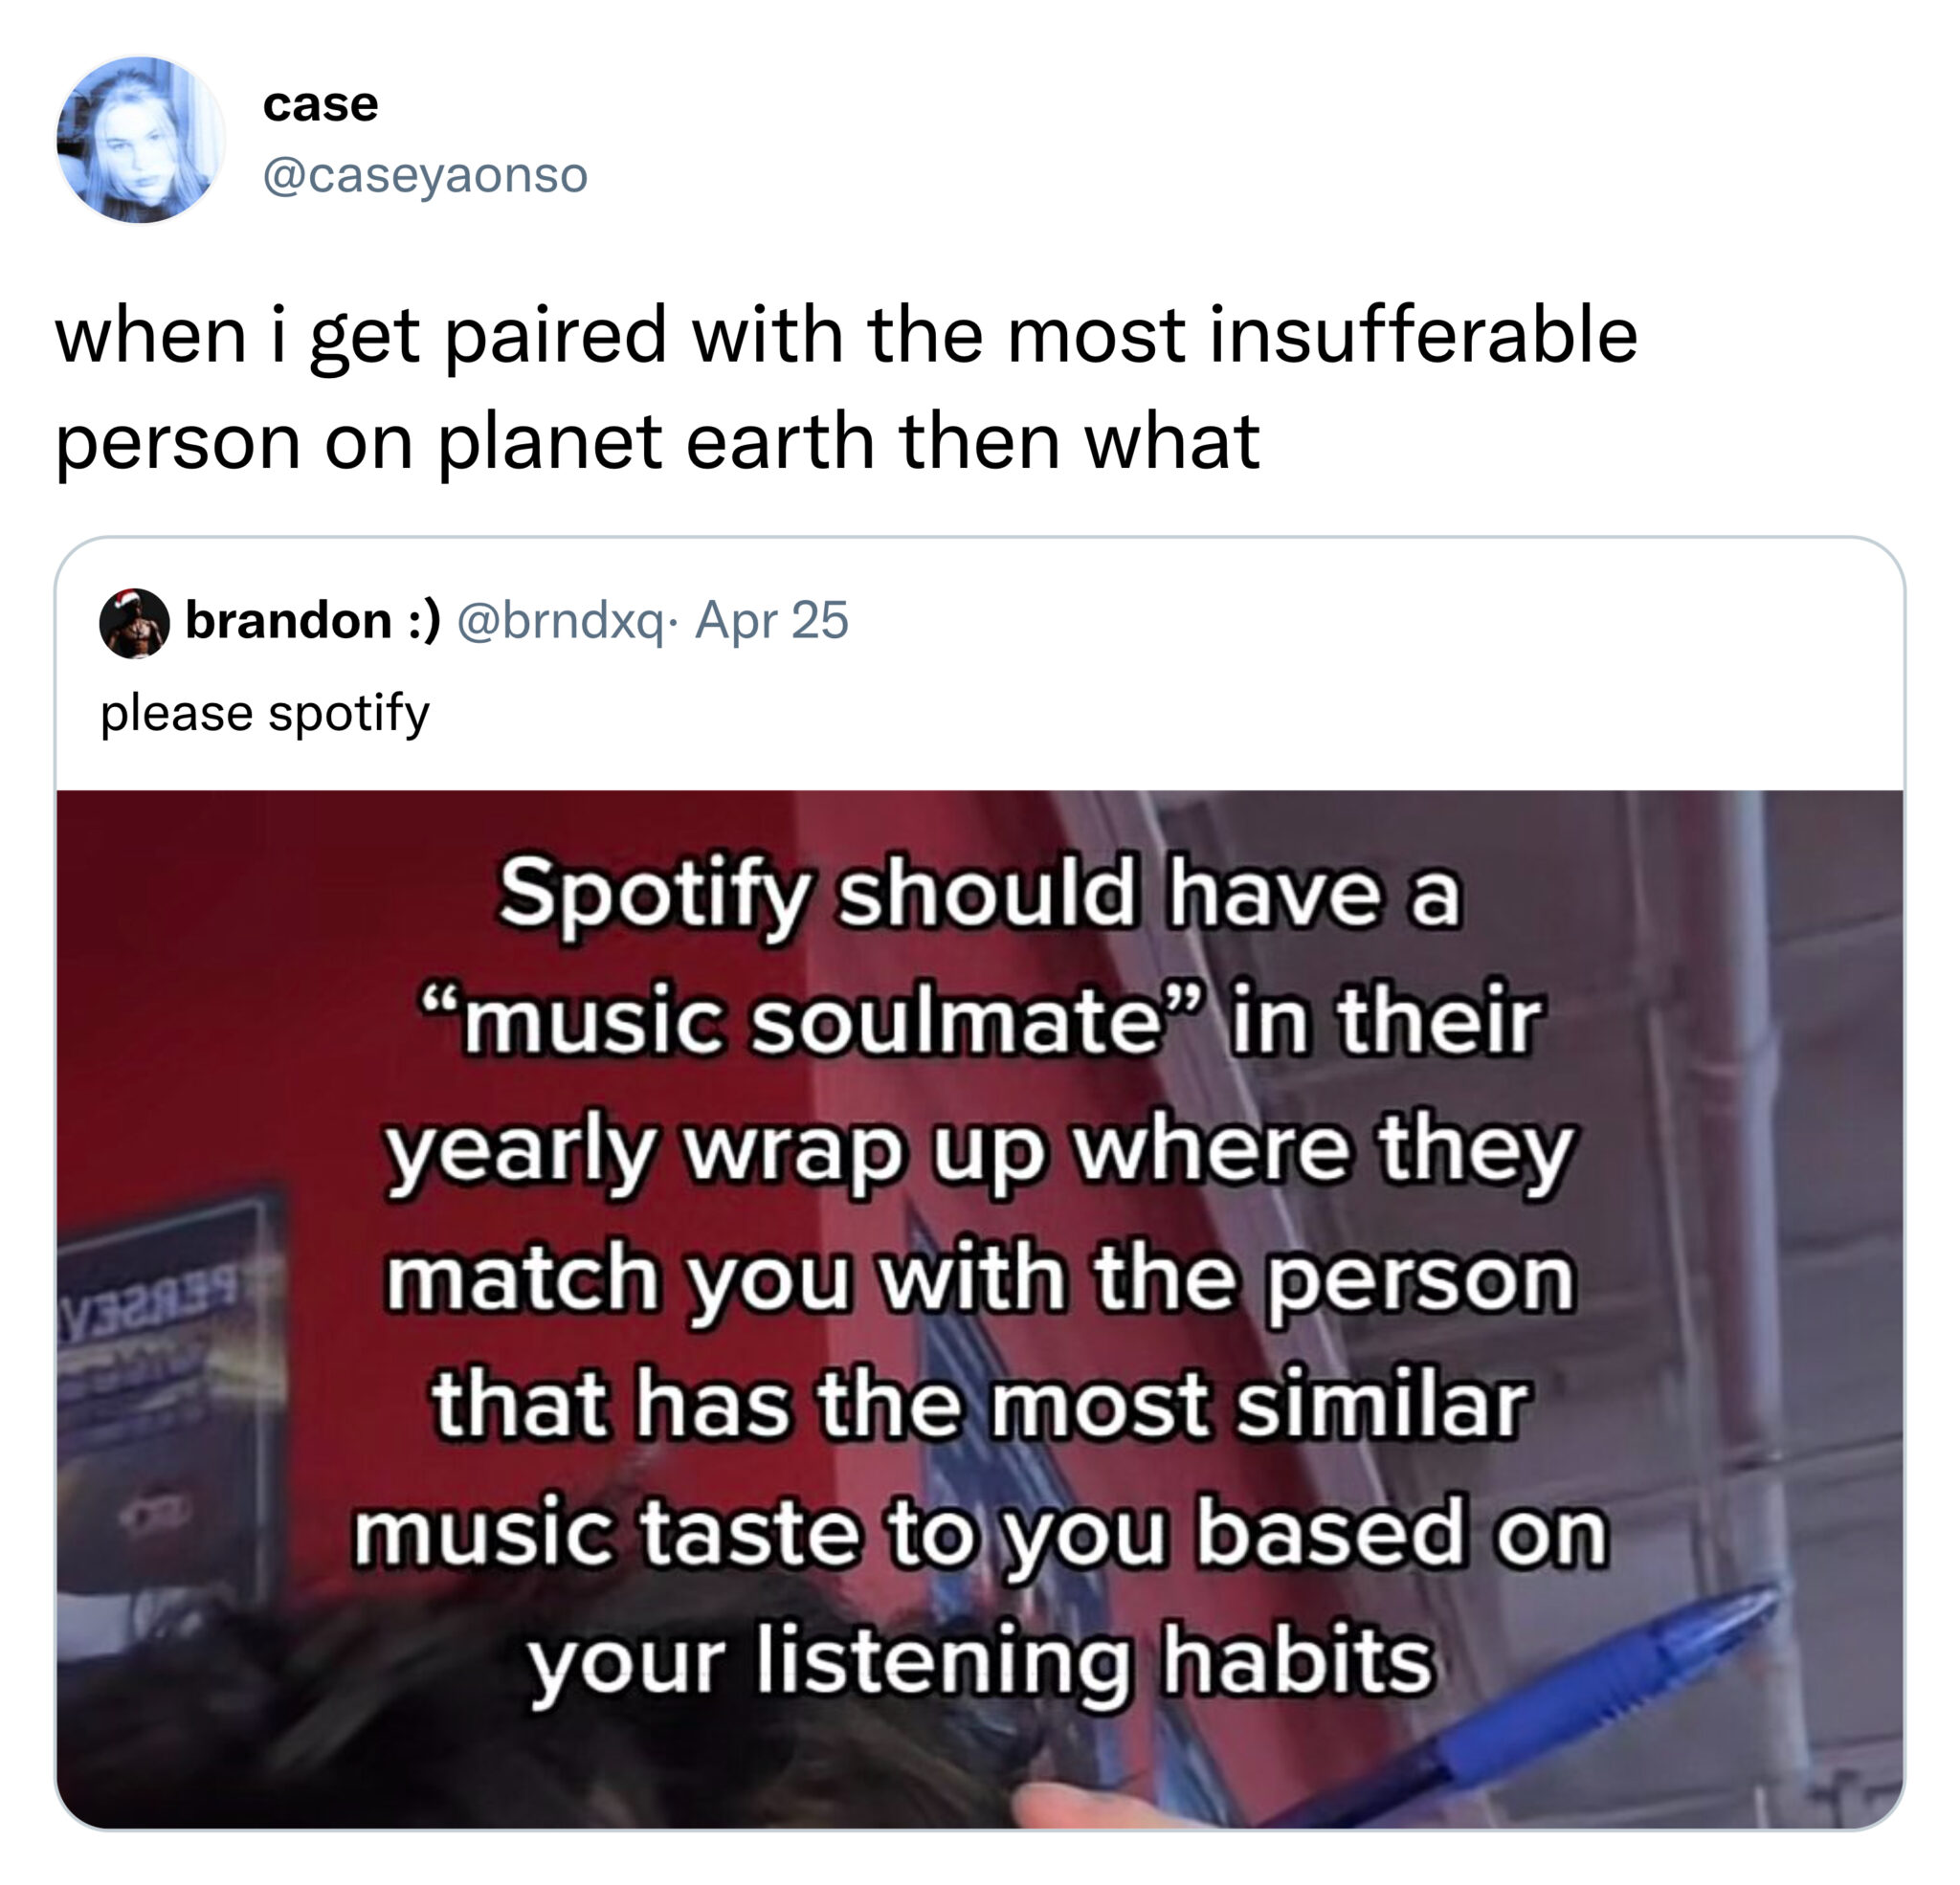 funny tweets - media - case when i get paired with the most insufferable person on planet earth then what brandon . Apr 25 please spotify Spotify should have a "music soulmate" in their yearly wrap up where they match you with the person that has the most